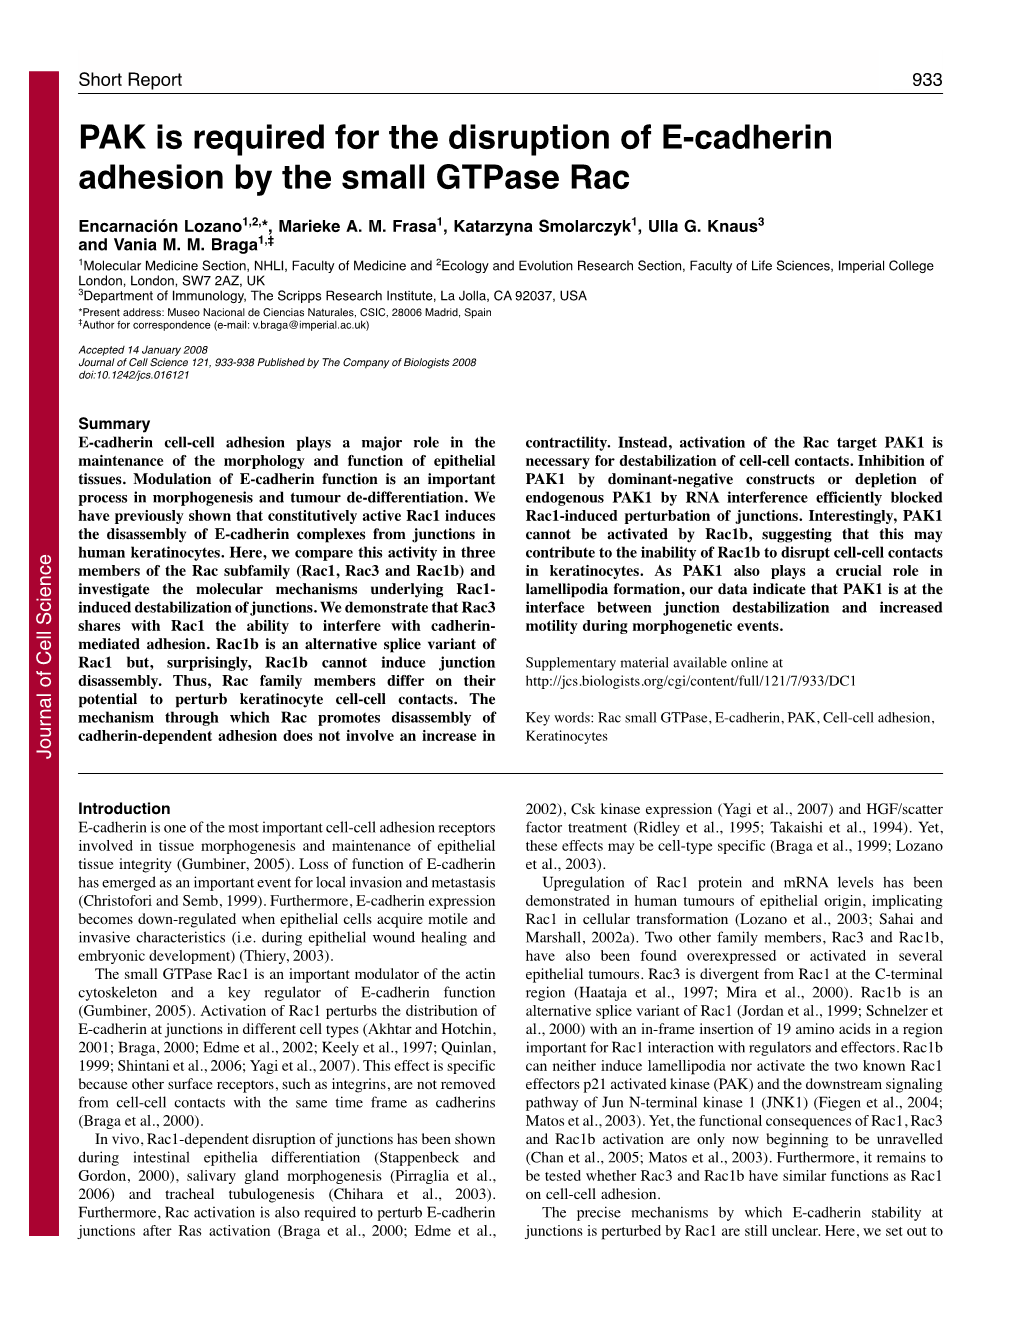 PAK Is Required for the Disruption of E-Cadherin Adhesion by the Small Gtpase Rac